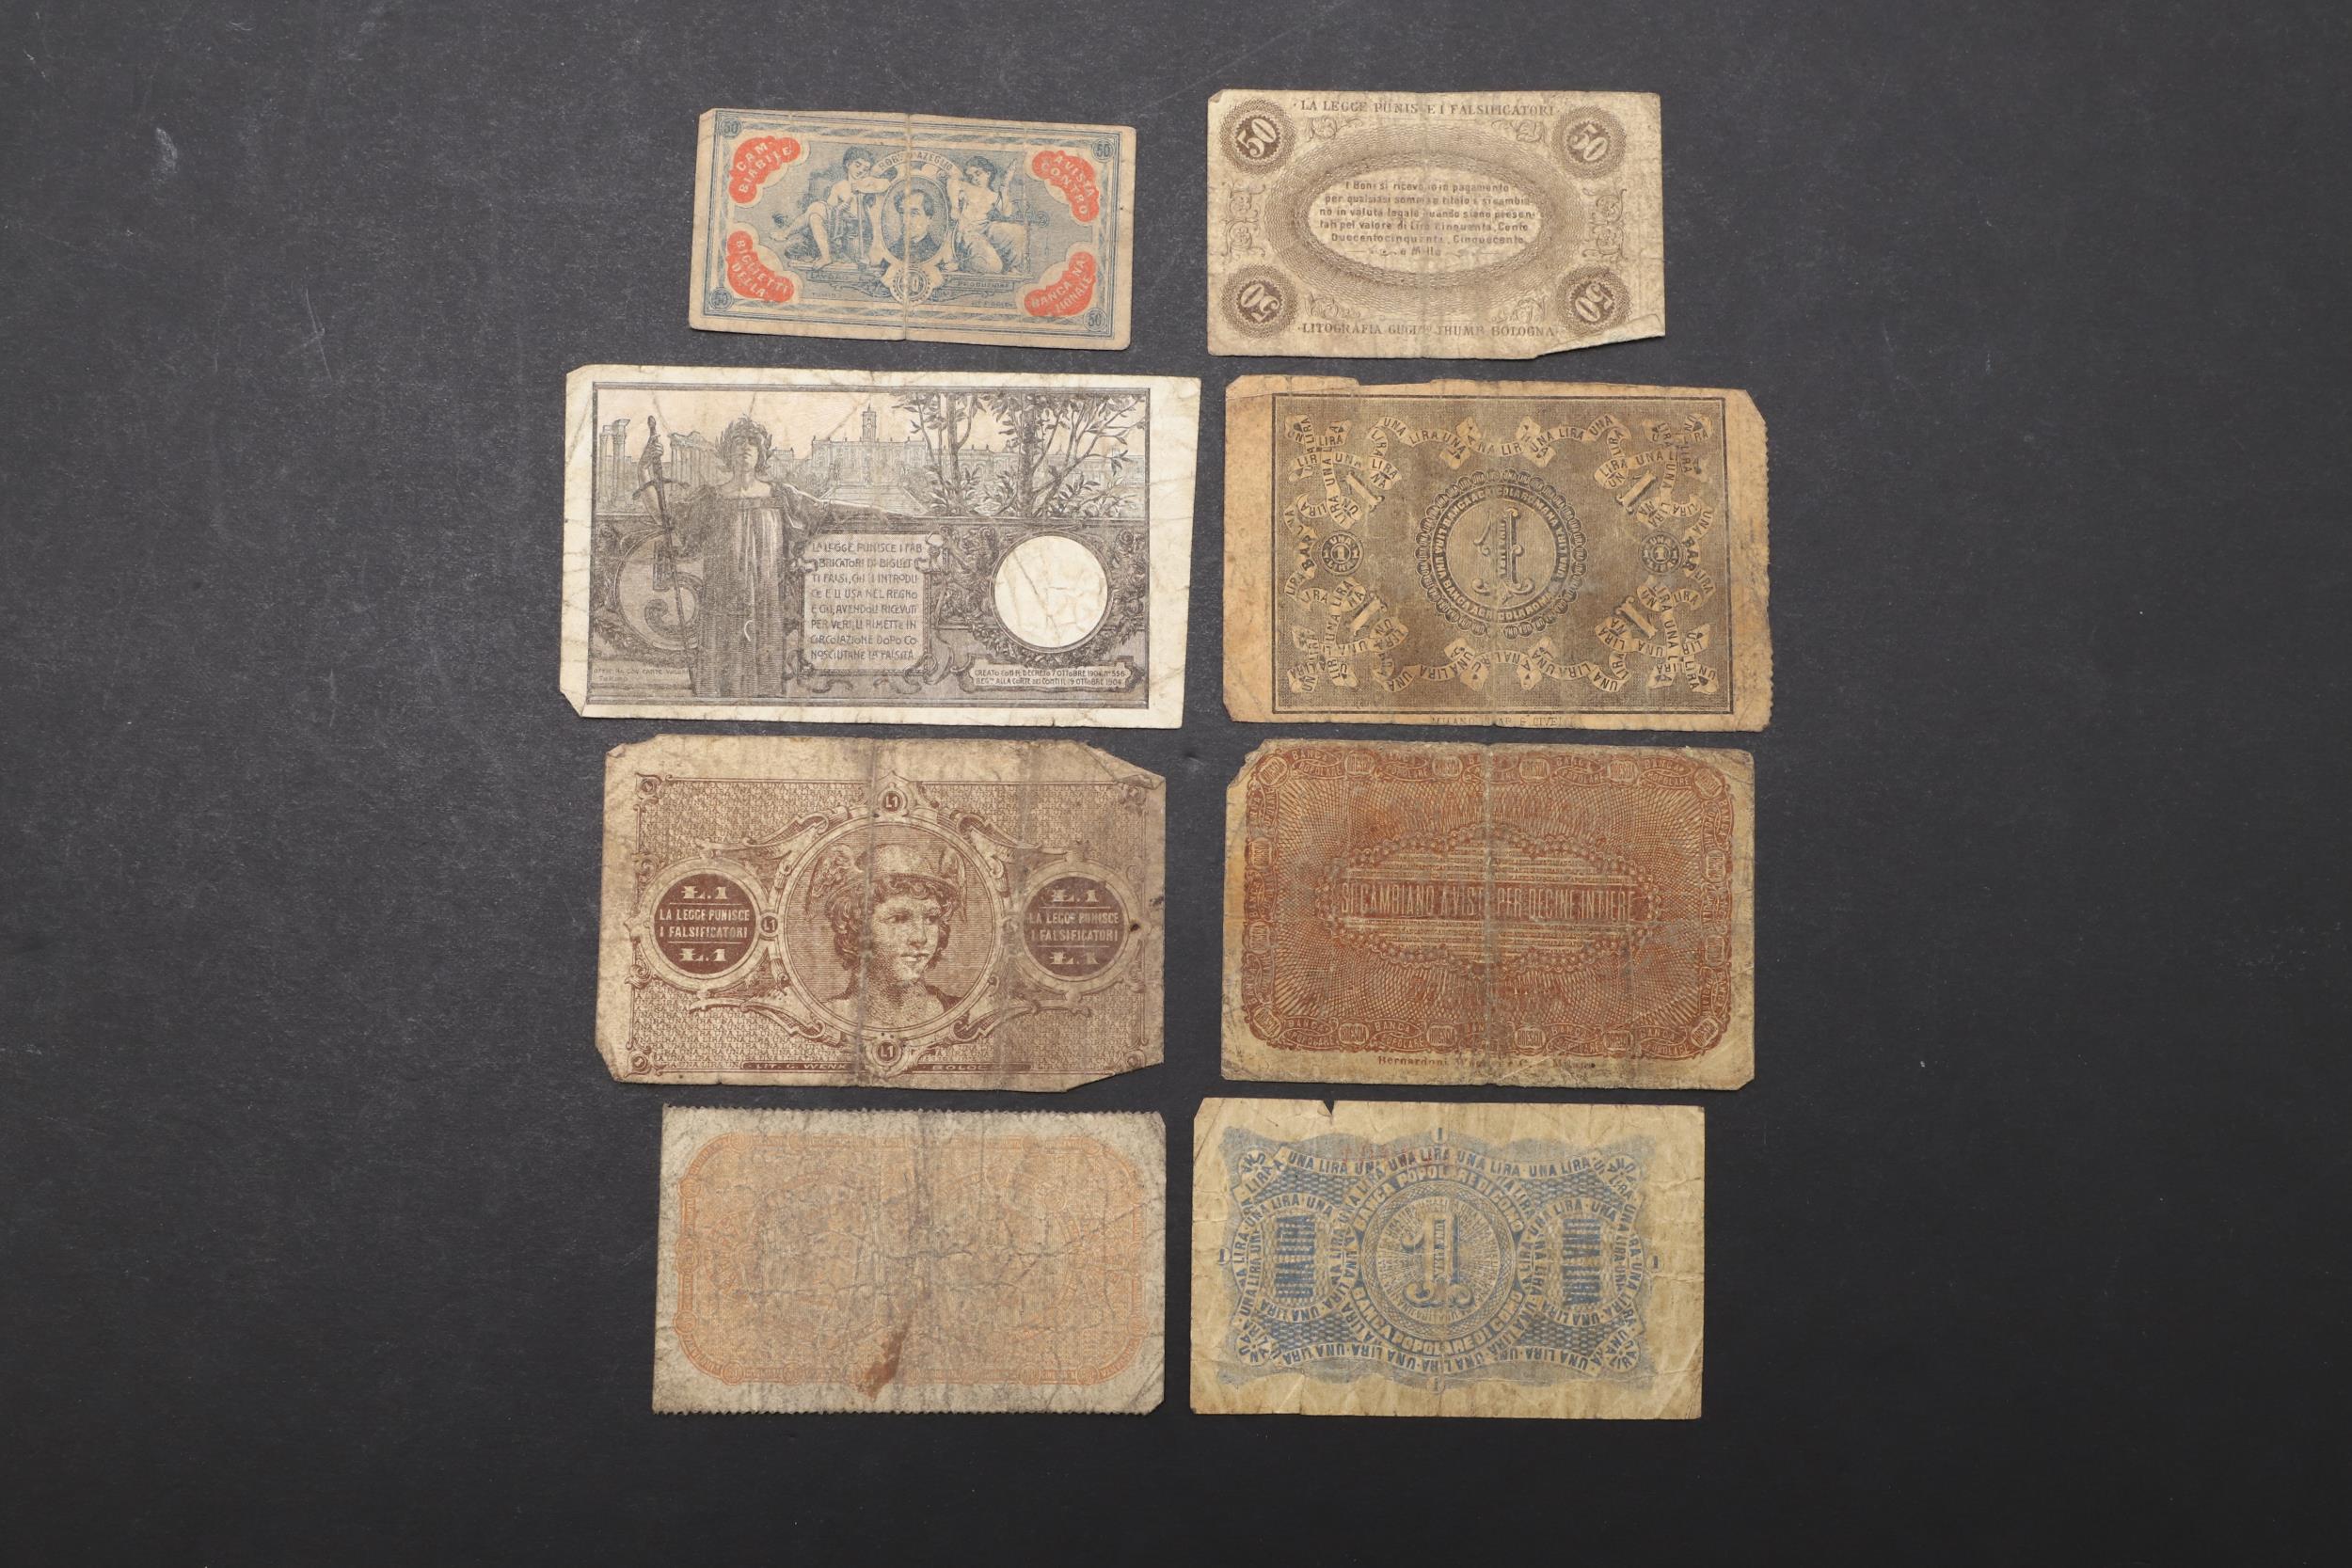 A COLLECTION OF EARLY ITALIAN BANKNOTES. - Image 4 of 6